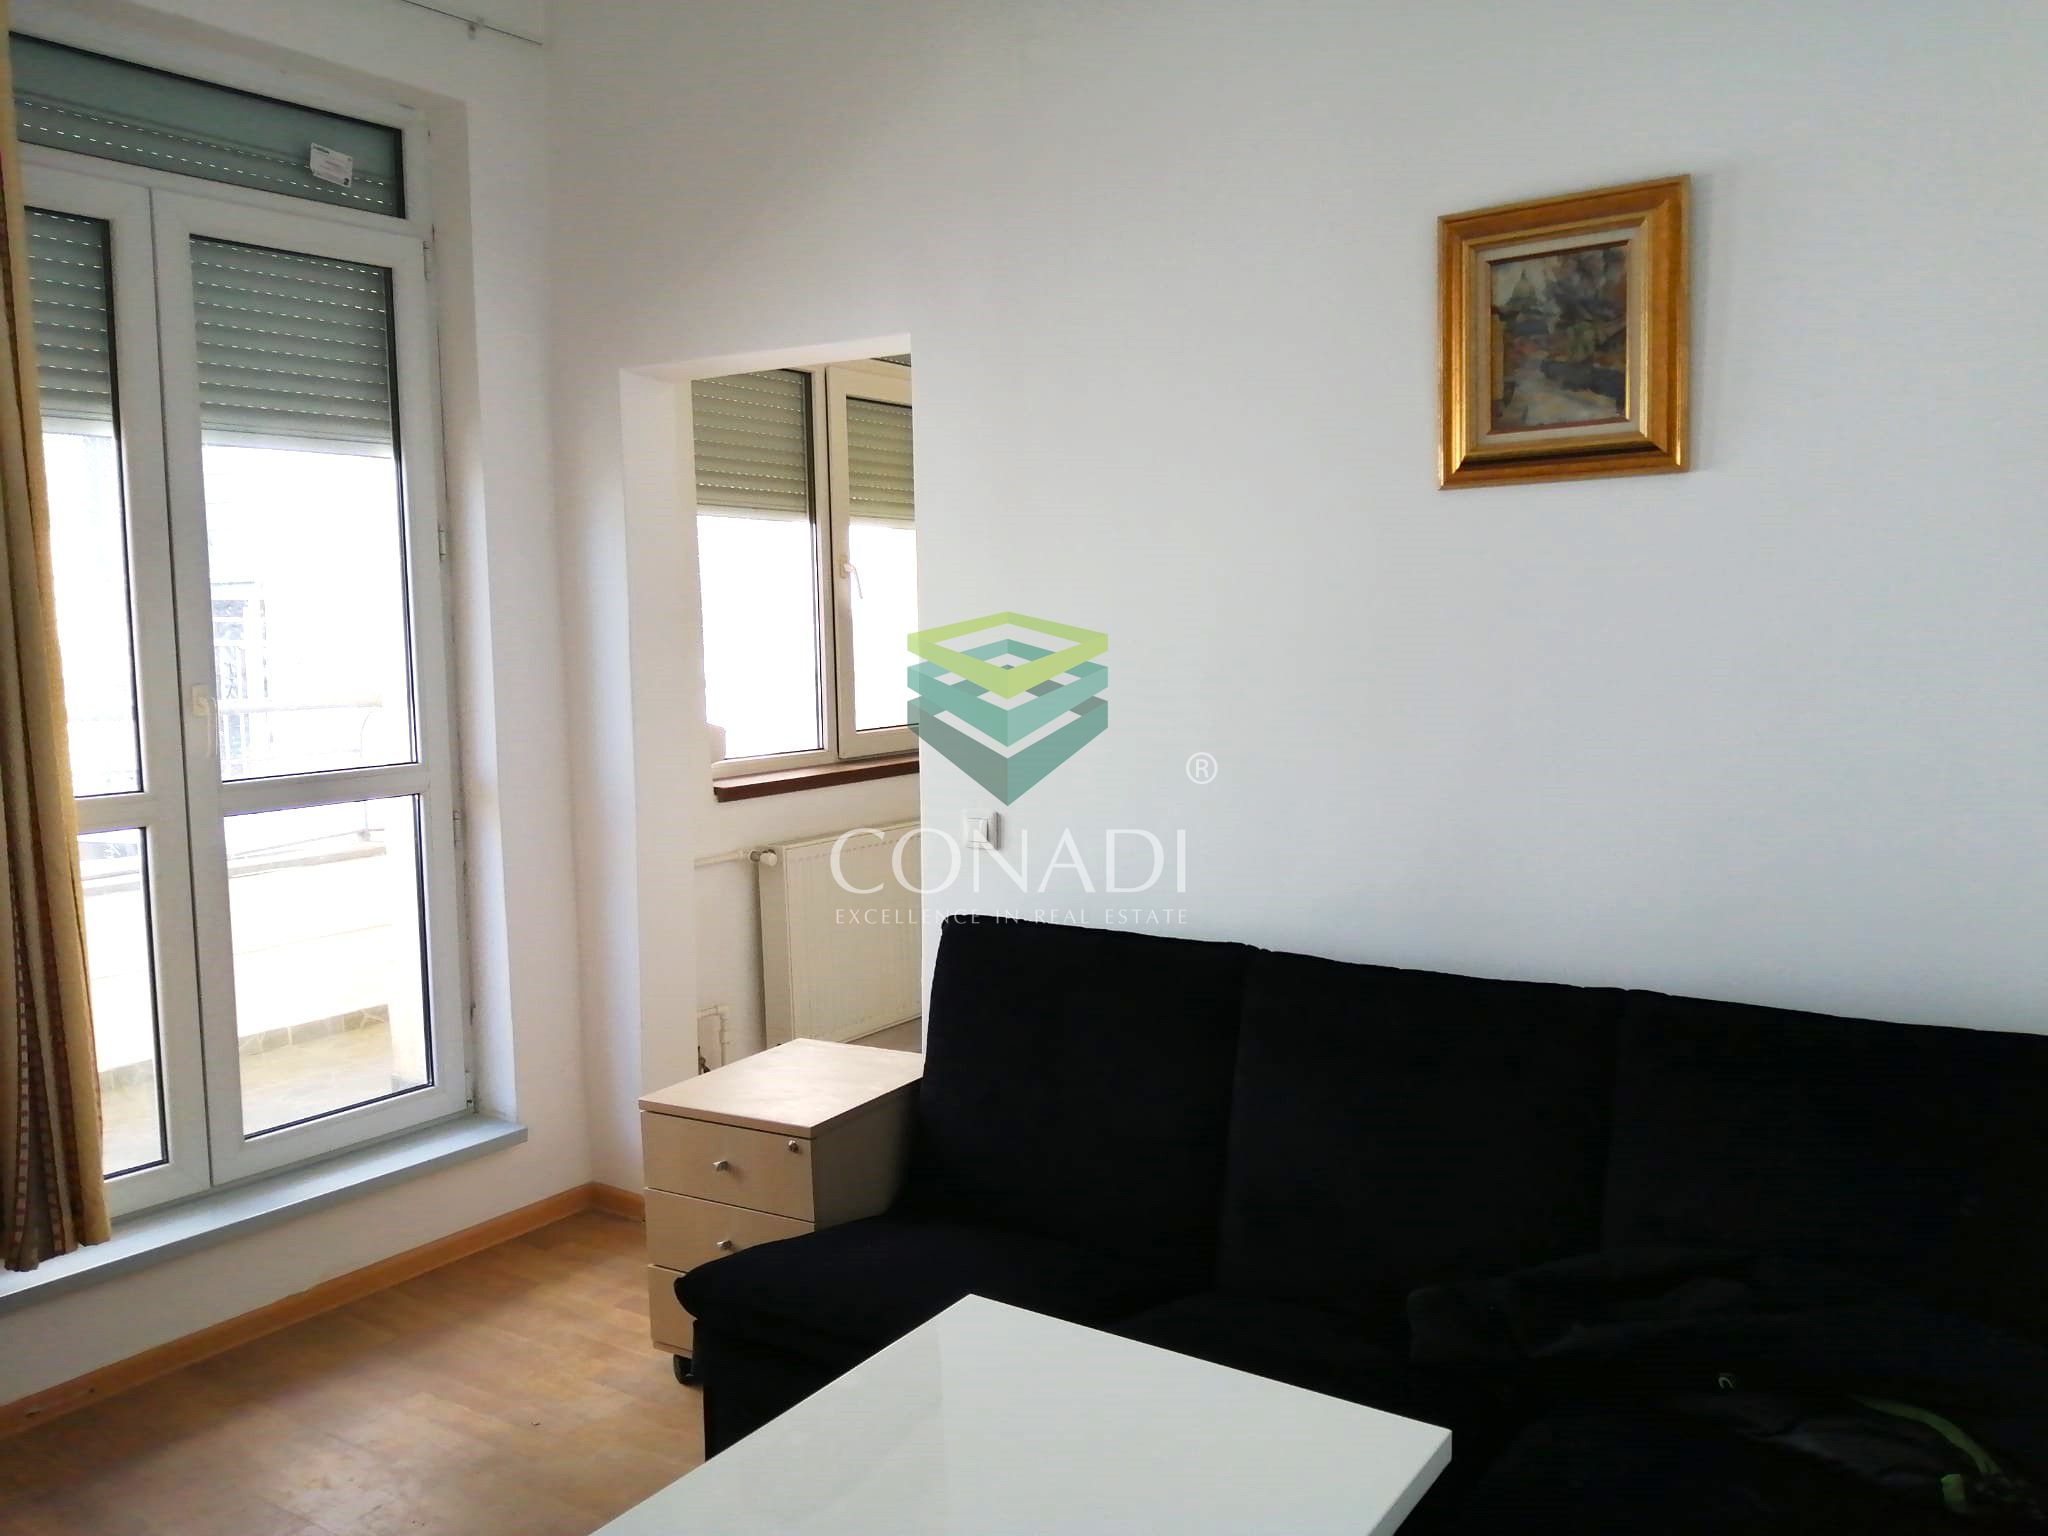 Sala Palatului-Atheneum, apartment with 2 rooms for rent, 55 square meters